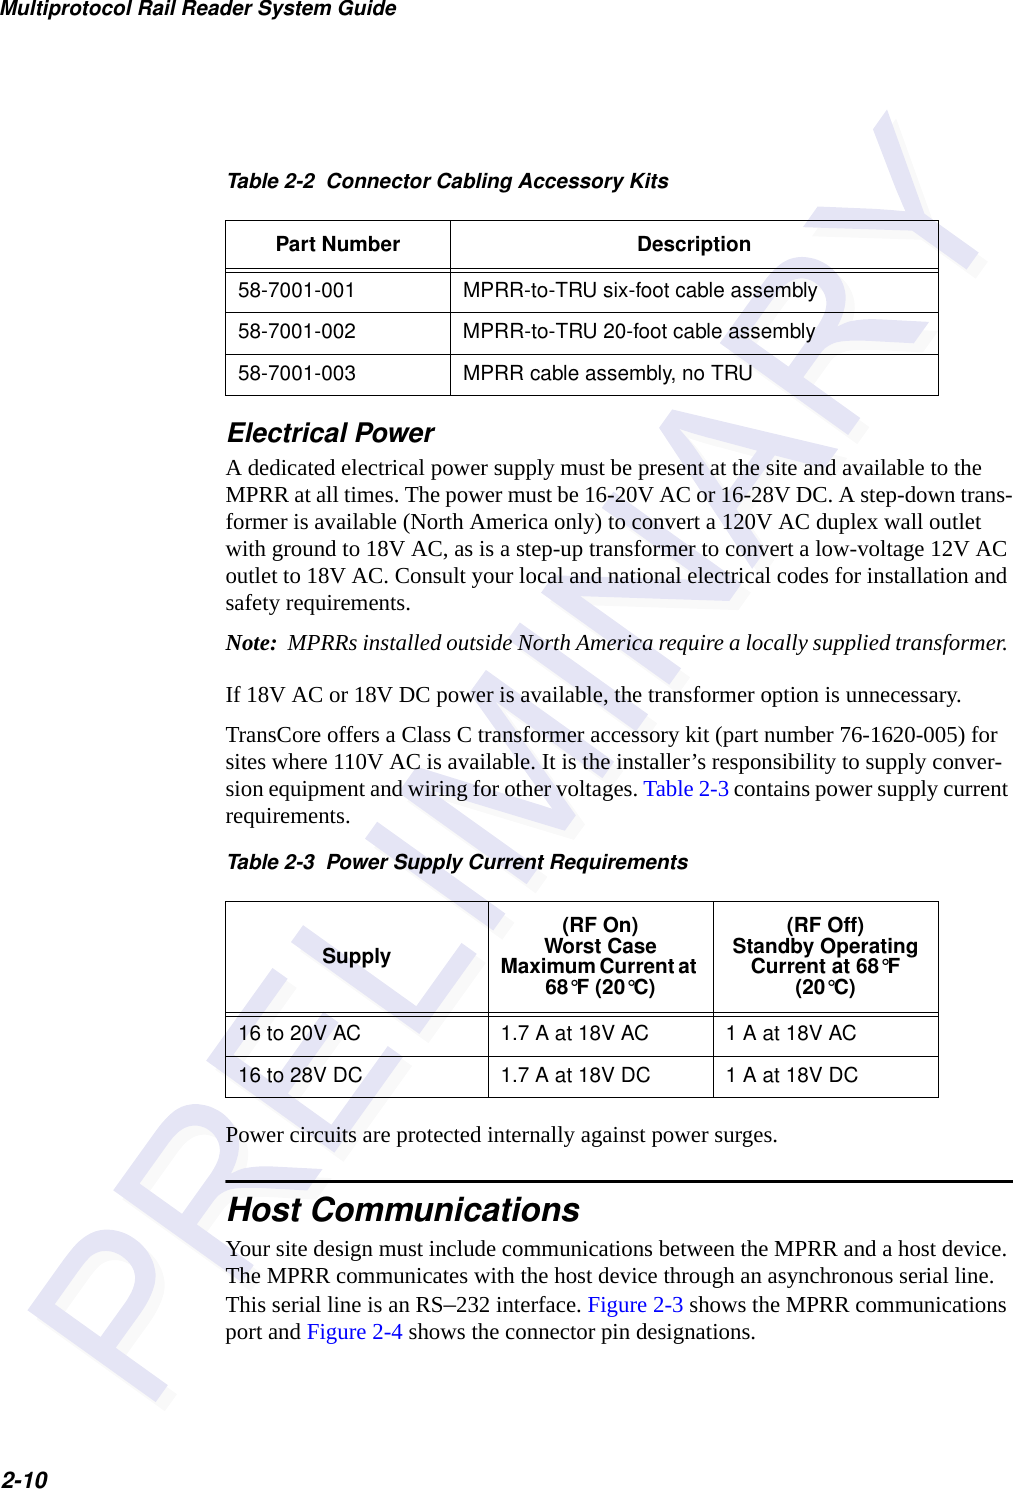 Multiprotocol Rail Reader System Guide2-10Electrical PowerA dedicated electrical power supply must be present at the site and available to the MPRR at all times. The power must be 16-20V AC or 16-28V DC. A step-down trans-former is available (North America only) to convert a 120V AC duplex wall outlet with ground to 18V AC, as is a step-up transformer to convert a low-voltage 12V AC outlet to 18V AC. Consult your local and national electrical codes for installation and safety requirements.Note:  MPRRs installed outside North America require a locally supplied transformer. If 18V AC or 18V DC power is available, the transformer option is unnecessary.TransCore offers a Class C transformer accessory kit (part number 76-1620-005) for sites where 110V AC is available. It is the installer’s responsibility to supply conver-sion equipment and wiring for other voltages. Table 2-3 contains power supply current requirements.Power circuits are protected internally against power surges. Host CommunicationsYour site design must include communications between the MPRR and a host device. The MPRR communicates with the host device through an asynchronous serial line. This serial line is an RS–232 interface. Figure 2-3 shows the MPRR communications port and Figure 2-4 shows the connector pin designations.Table 2-2  Connector Cabling Accessory KitsPart Number Description58-7001-001 MPRR-to-TRU six-foot cable assembly58-7001-002 MPRR-to-TRU 20-foot cable assembly58-7001-003 MPRR cable assembly, no TRUTable 2-3  Power Supply Current RequirementsSupply(RF On)Worst Case Maximum Current at 68°F (20°C)(RF Off)Standby Operating Current at 68°F (20°C)16 to 20V AC 1.7 A at 18V AC 1 A at 18V AC16 to 28V DC 1.7 A at 18V DC 1 A at 18V DC